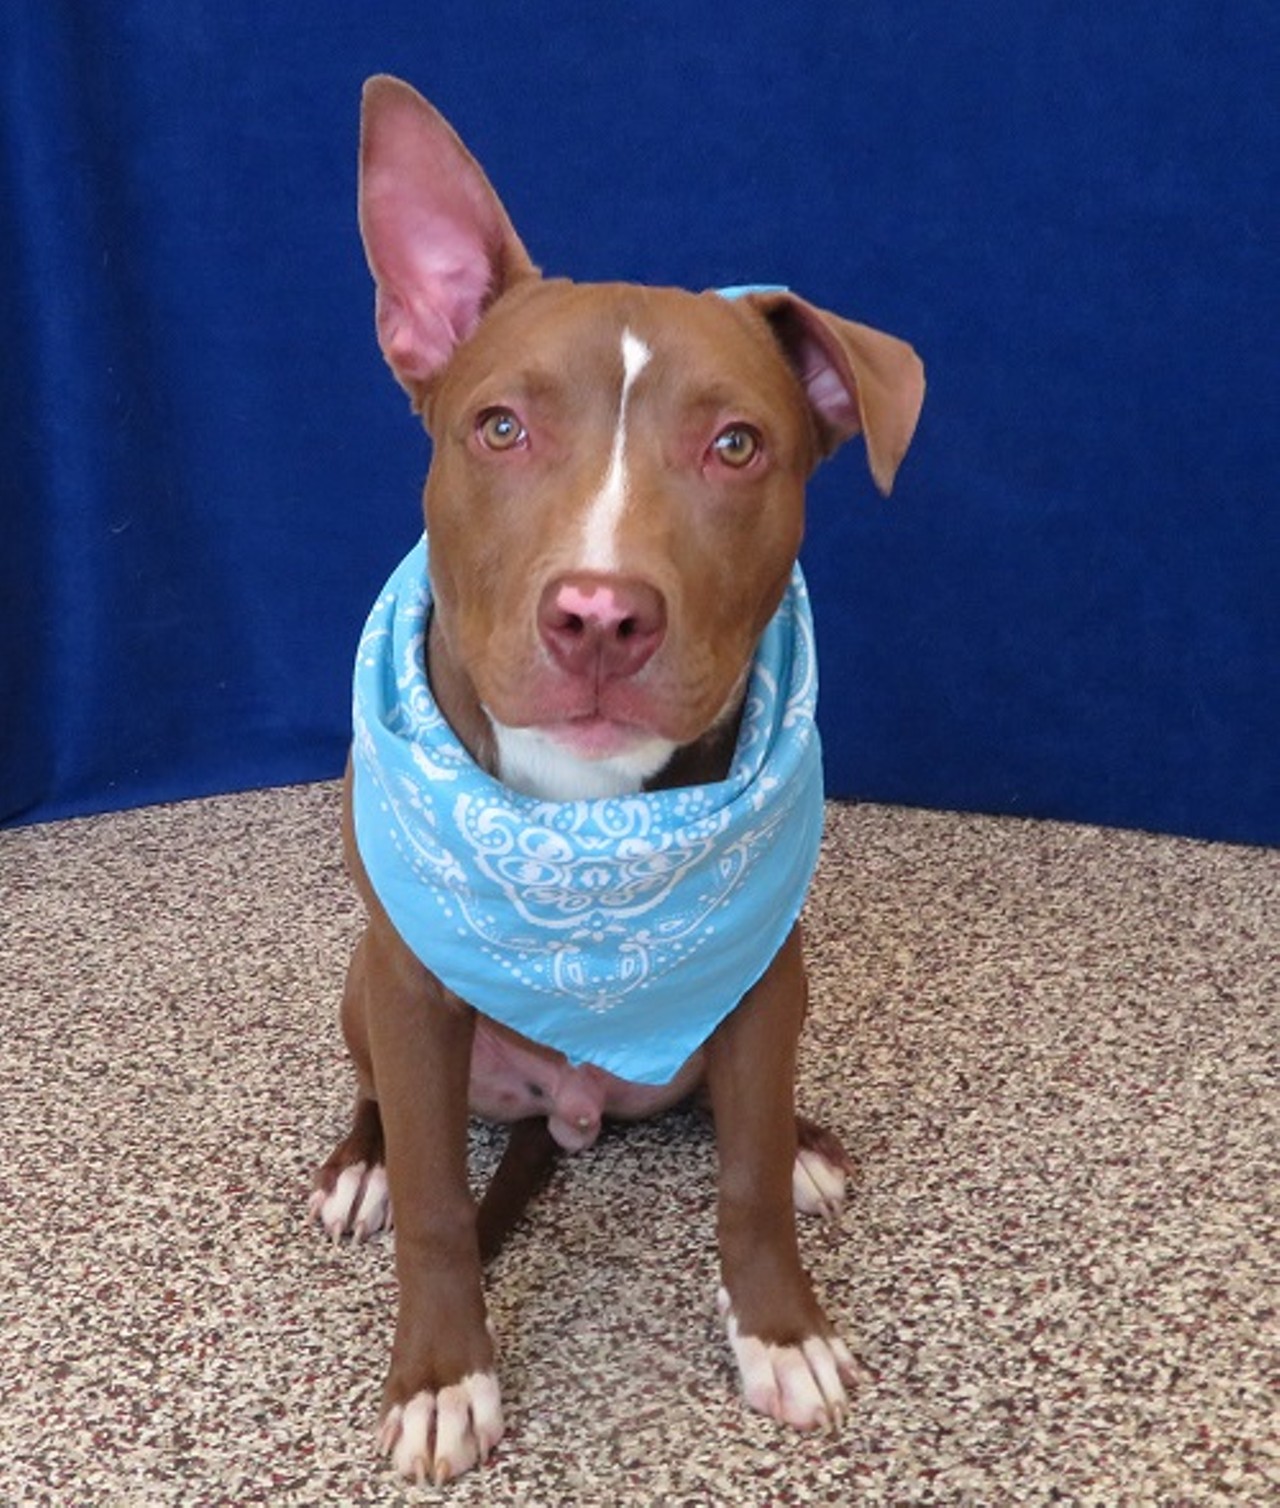 NAME: Red Wing
GENDER: Male
BREED: Pit Bull Terrier
AGE: 6 months
WEIGHT: 40 pounds
SPECIAL CONSIDERATIONS: None
REASON I CAME TO MHS: Owner surrender
LOCATION: Petco of Sterling Heights
ID NUMBER: 865323